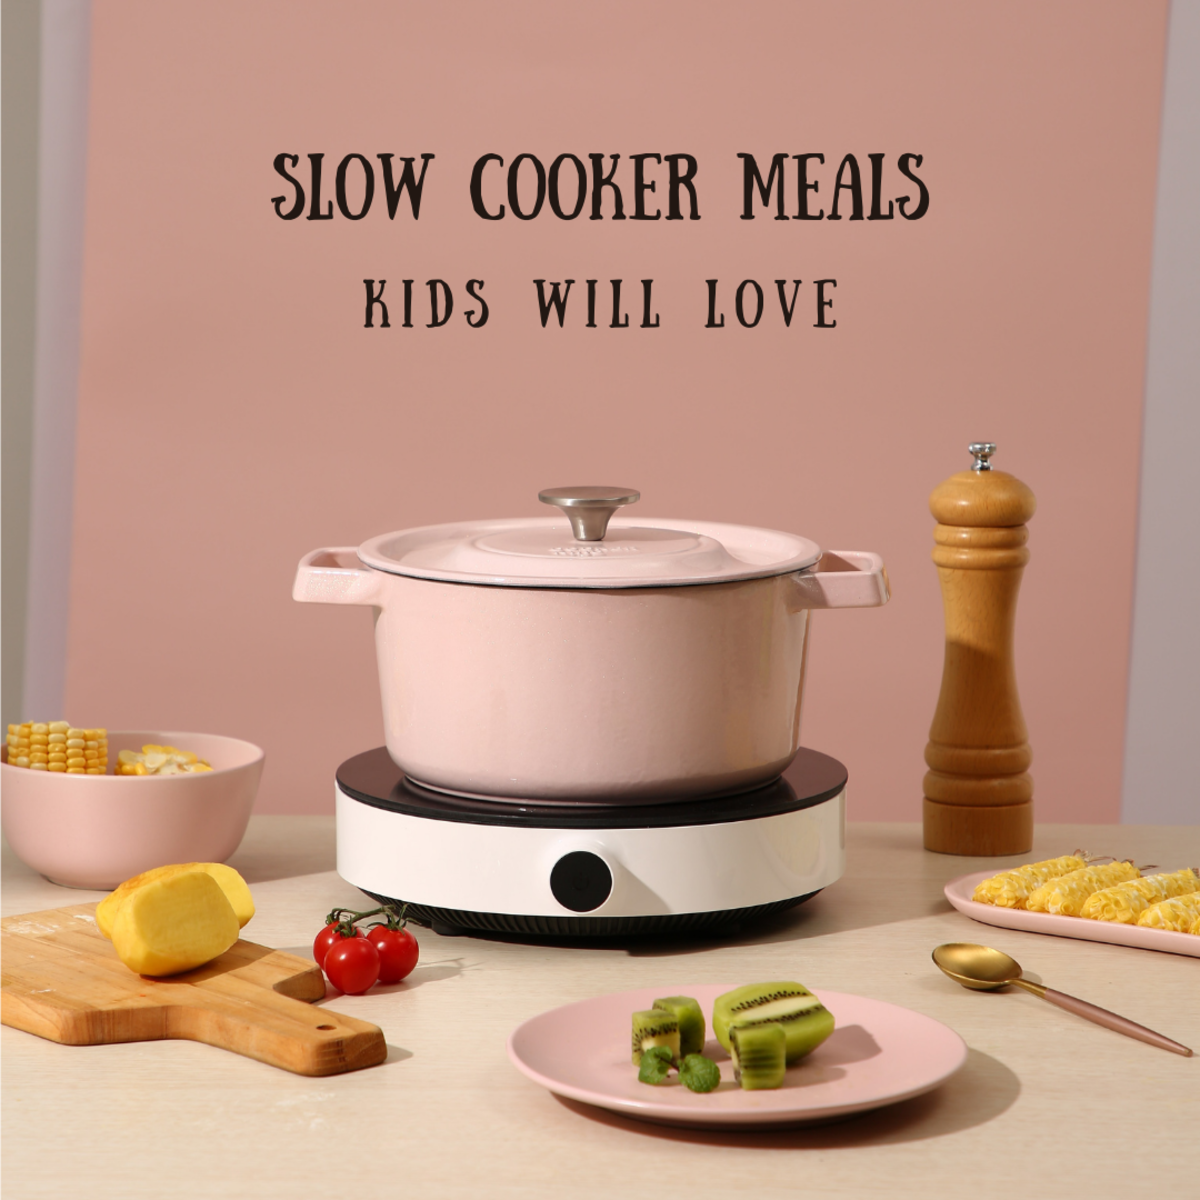 Are you looking for slow cooker recipes that are easy, kid-friendly, and delicious?